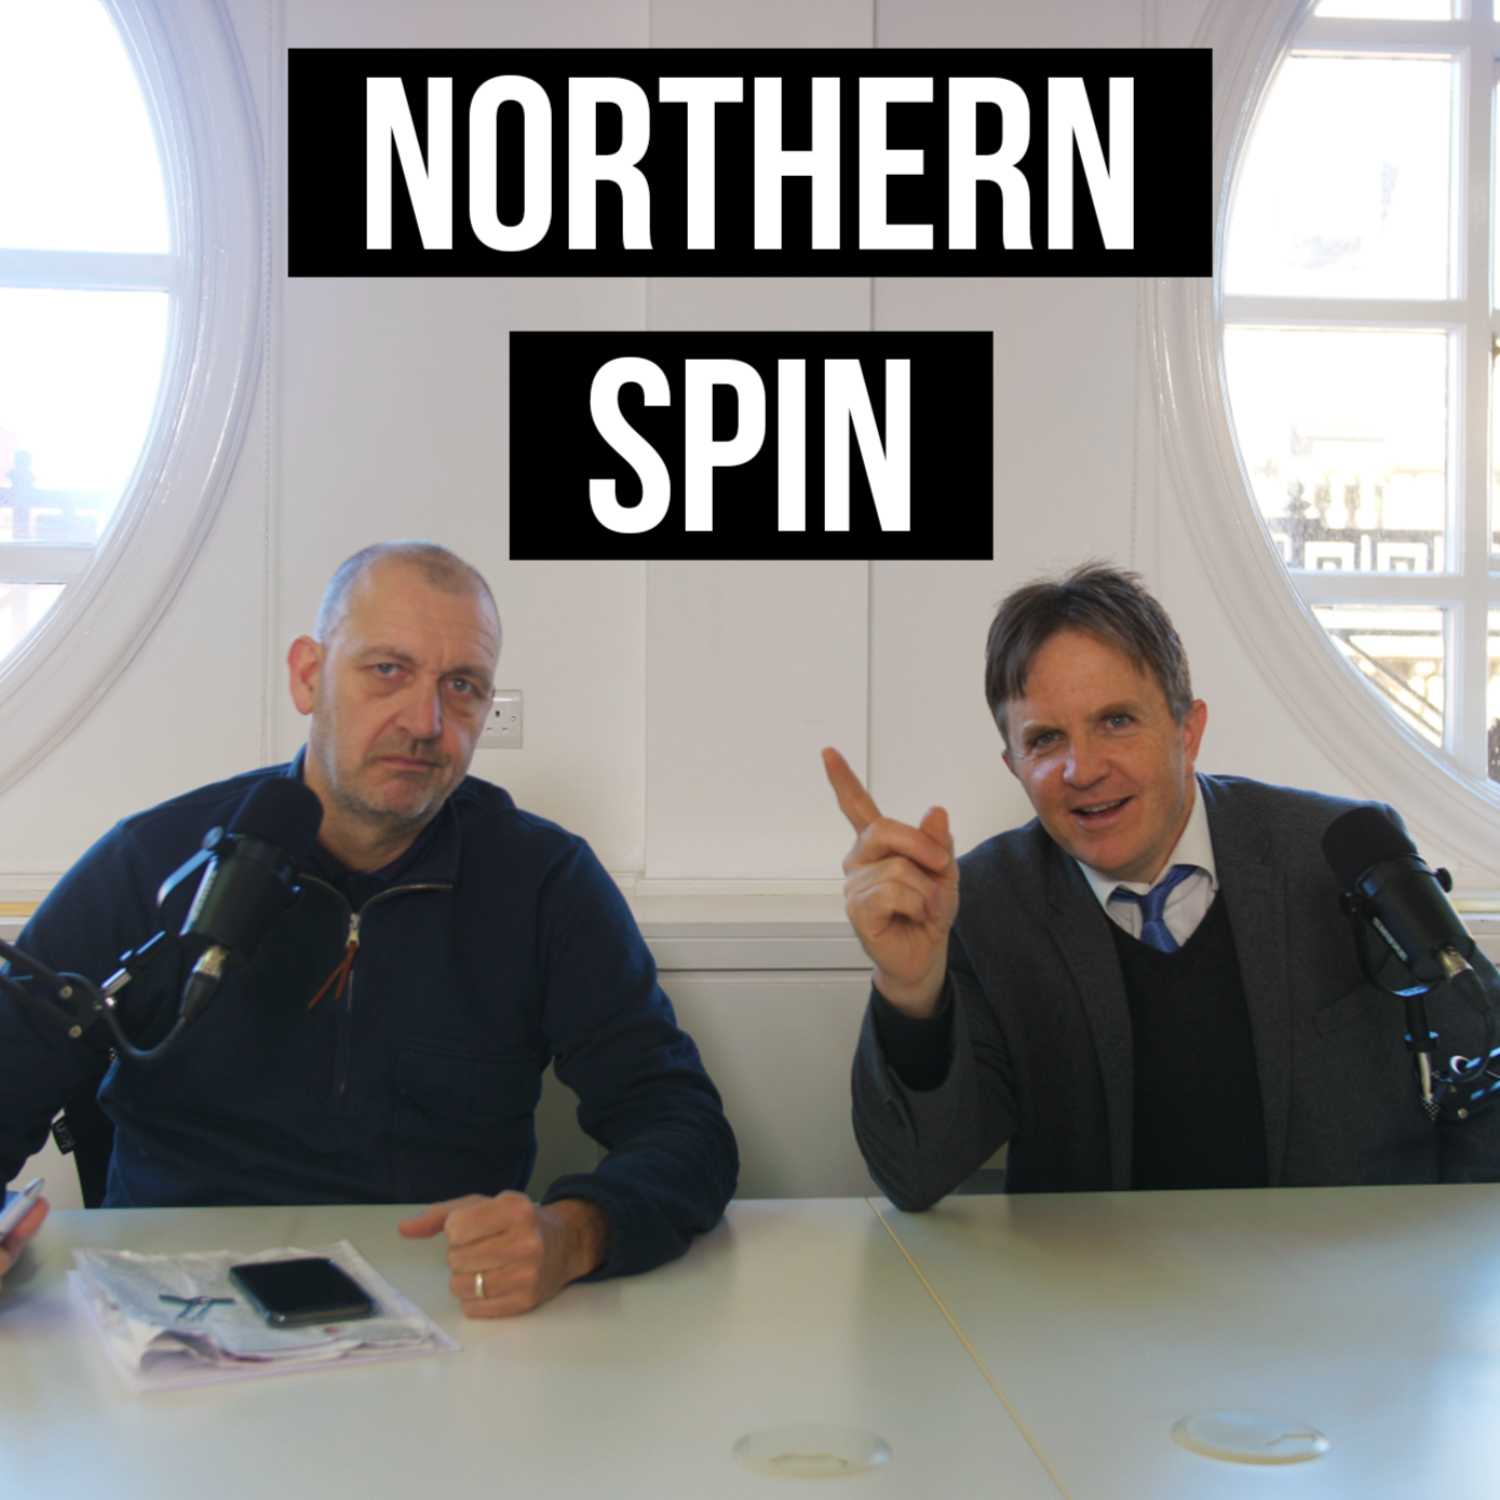 Northern Spin - Season 5 - Episode 7: Keep the faith - Northern Soul, Tory wipeout, Starmer and Israel